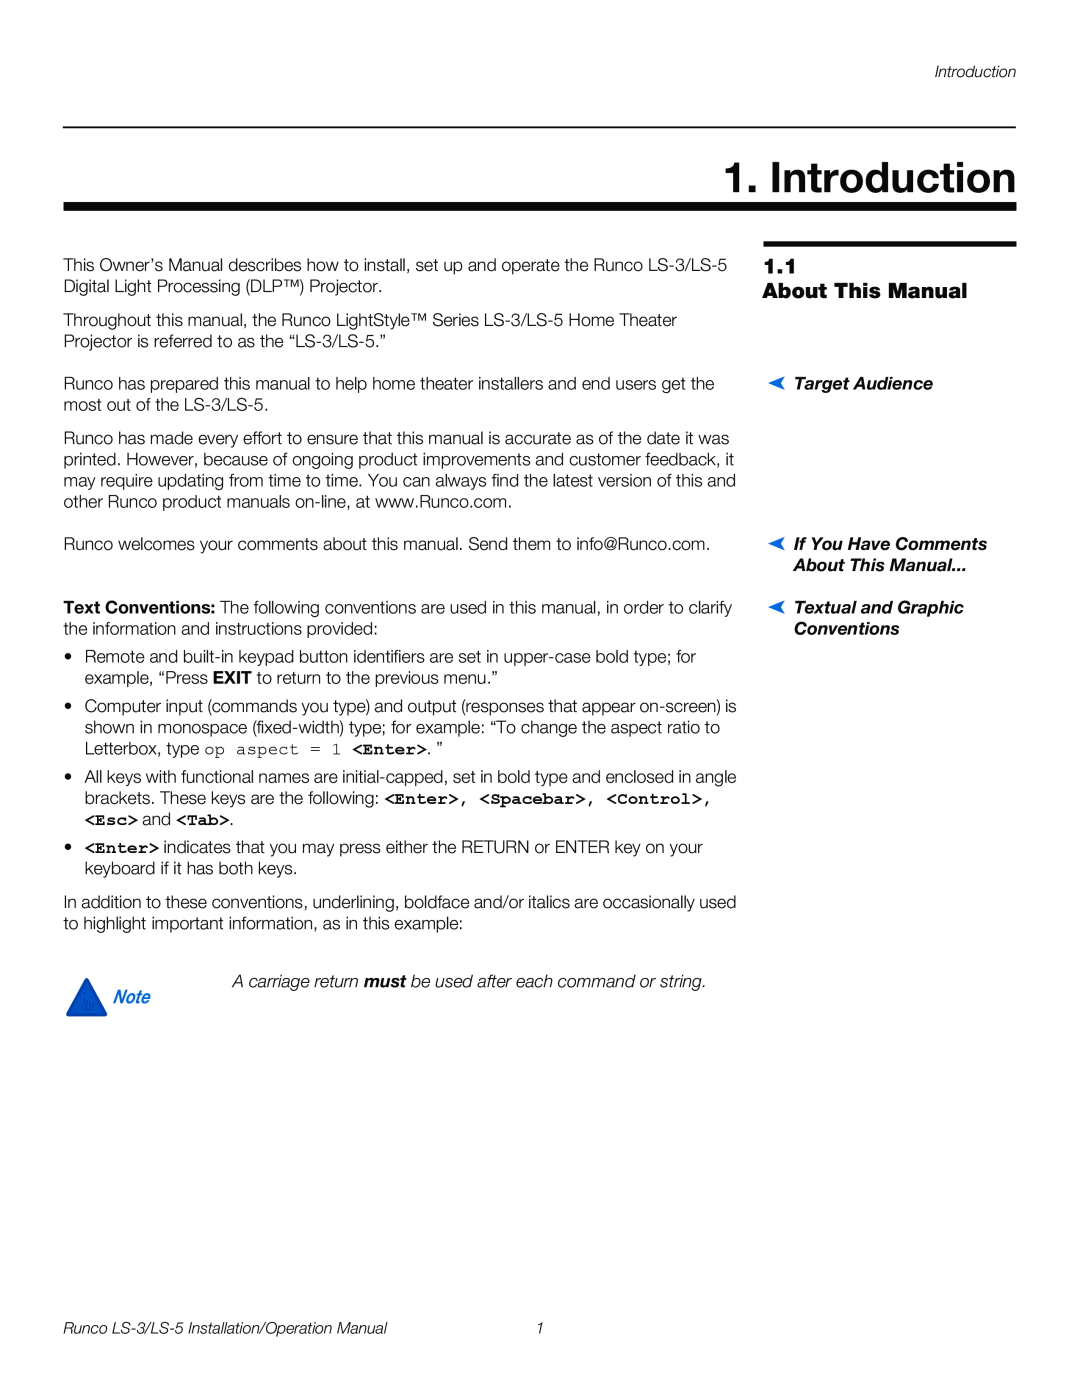 Runco LS-3, LS-5 operation manual Introduction, About This Manual 